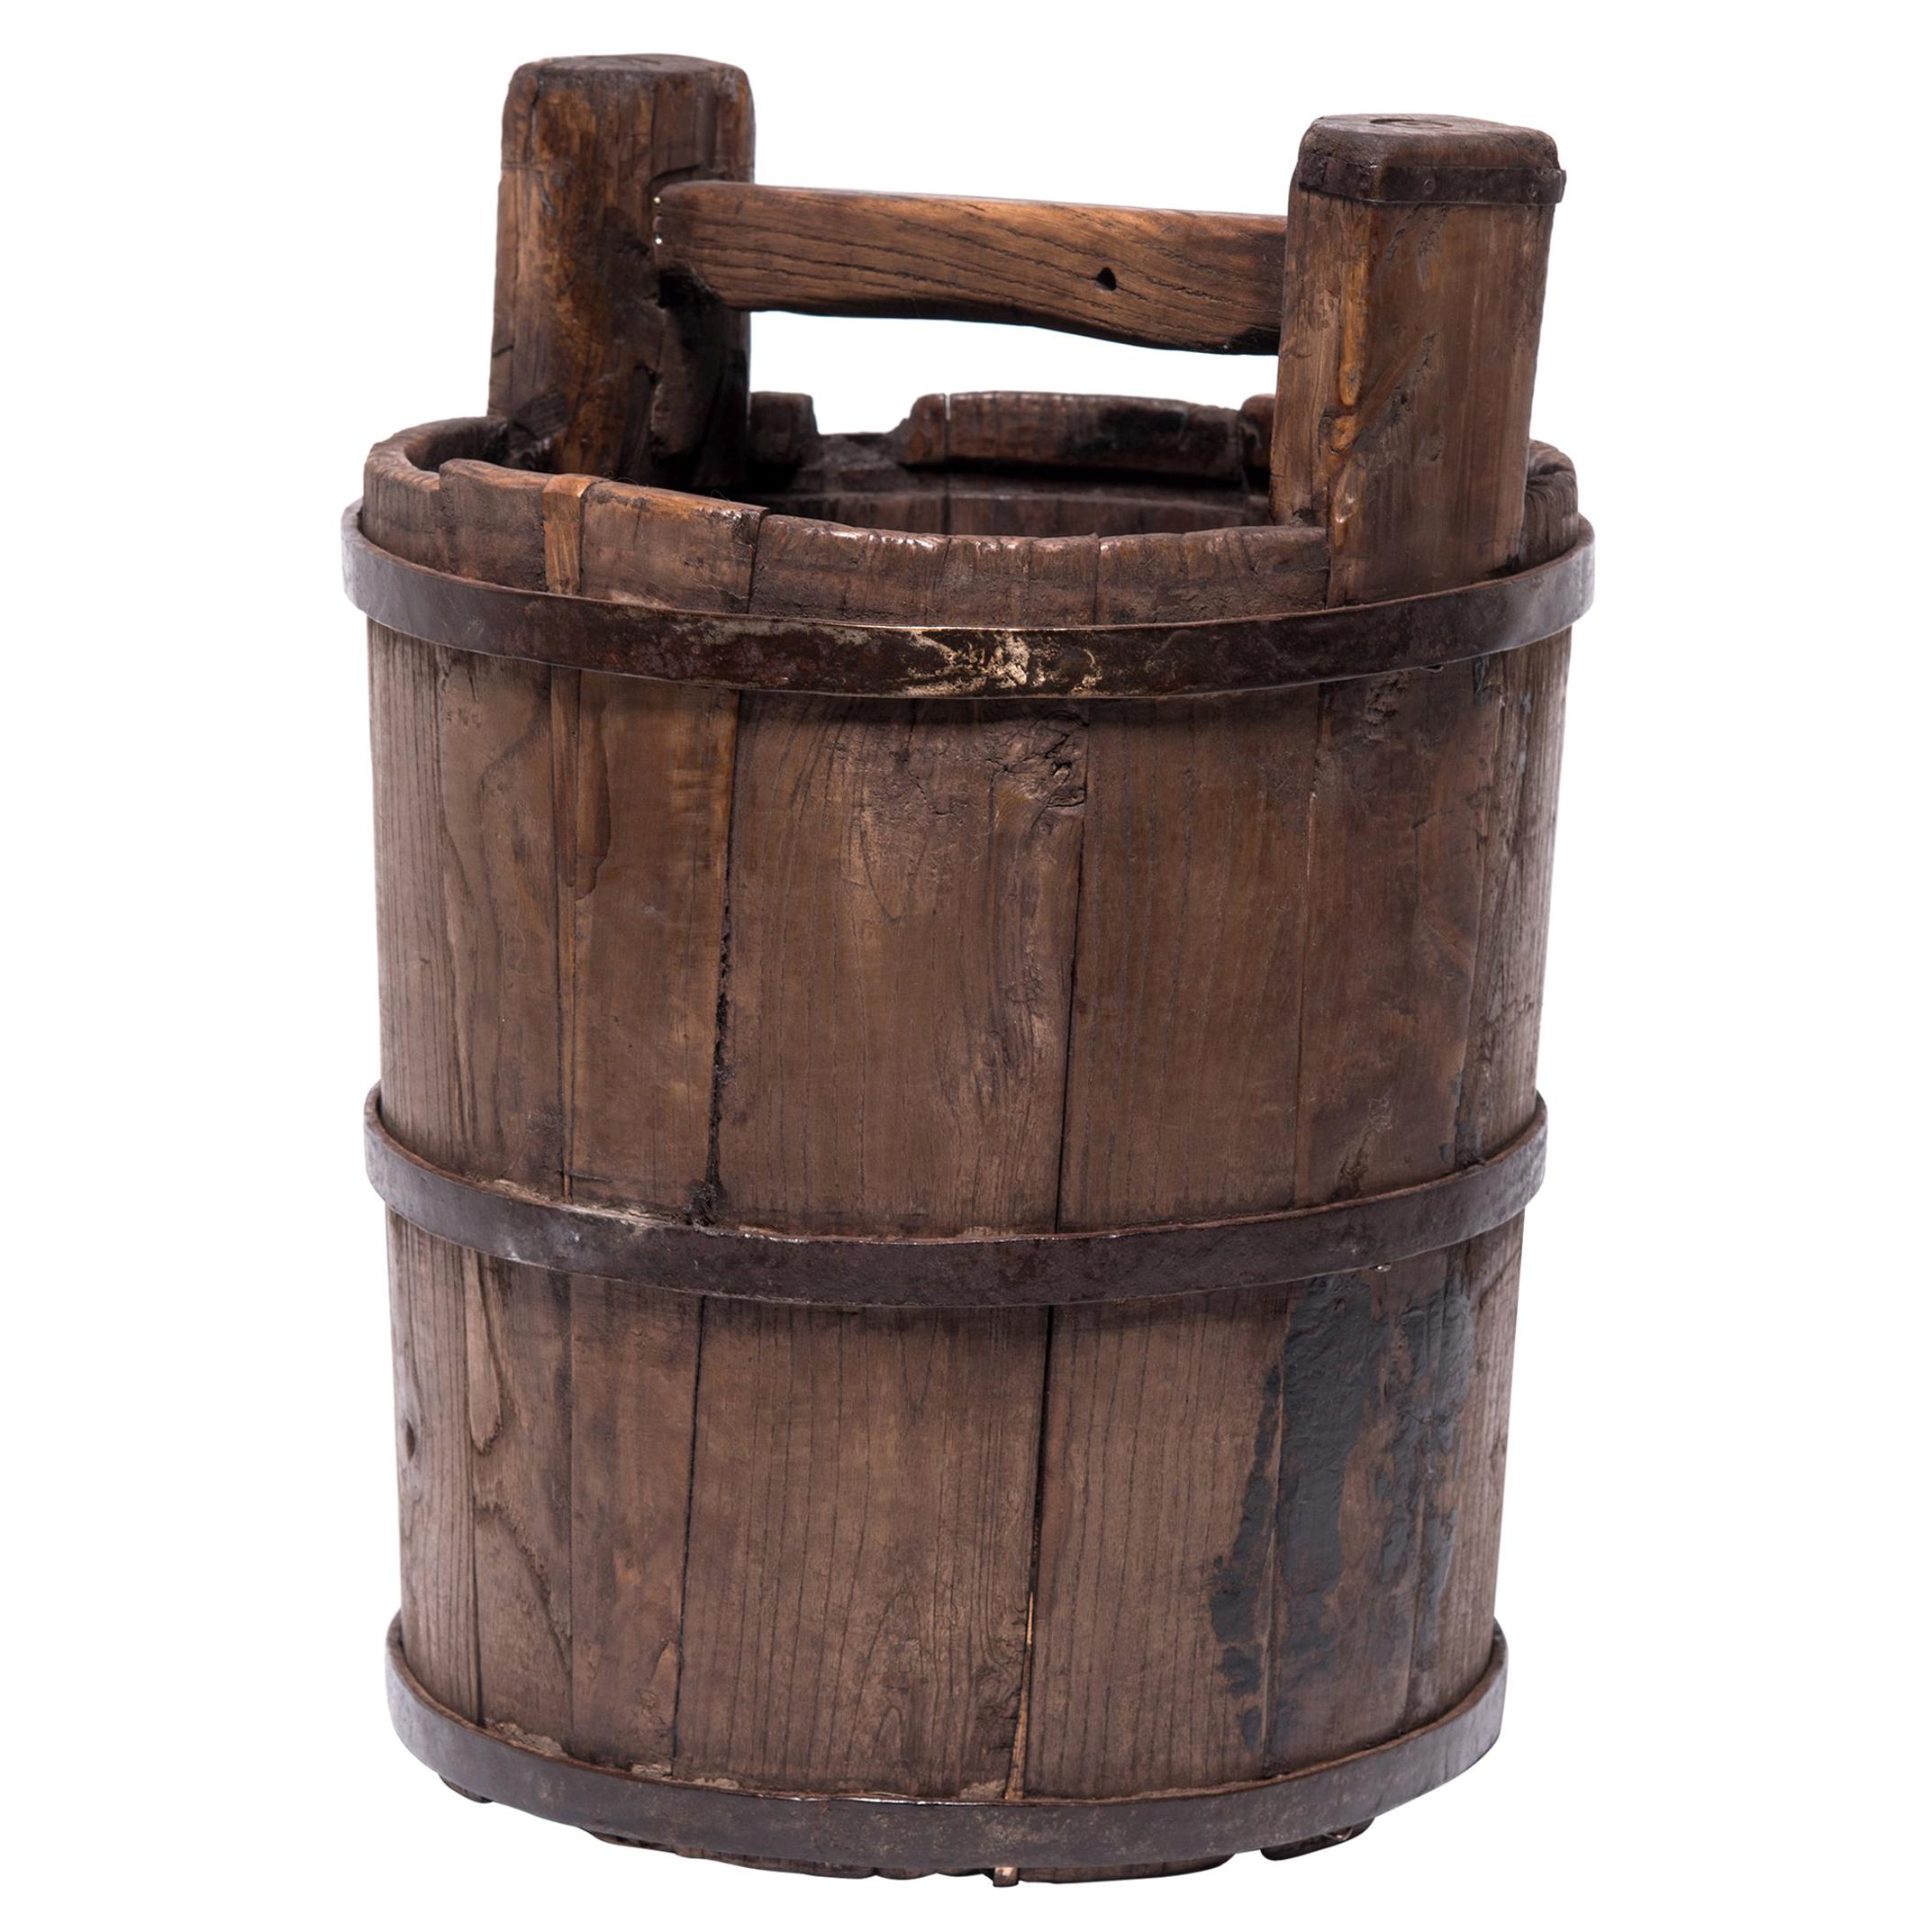 Early 20th Century Chinese Well Bucket